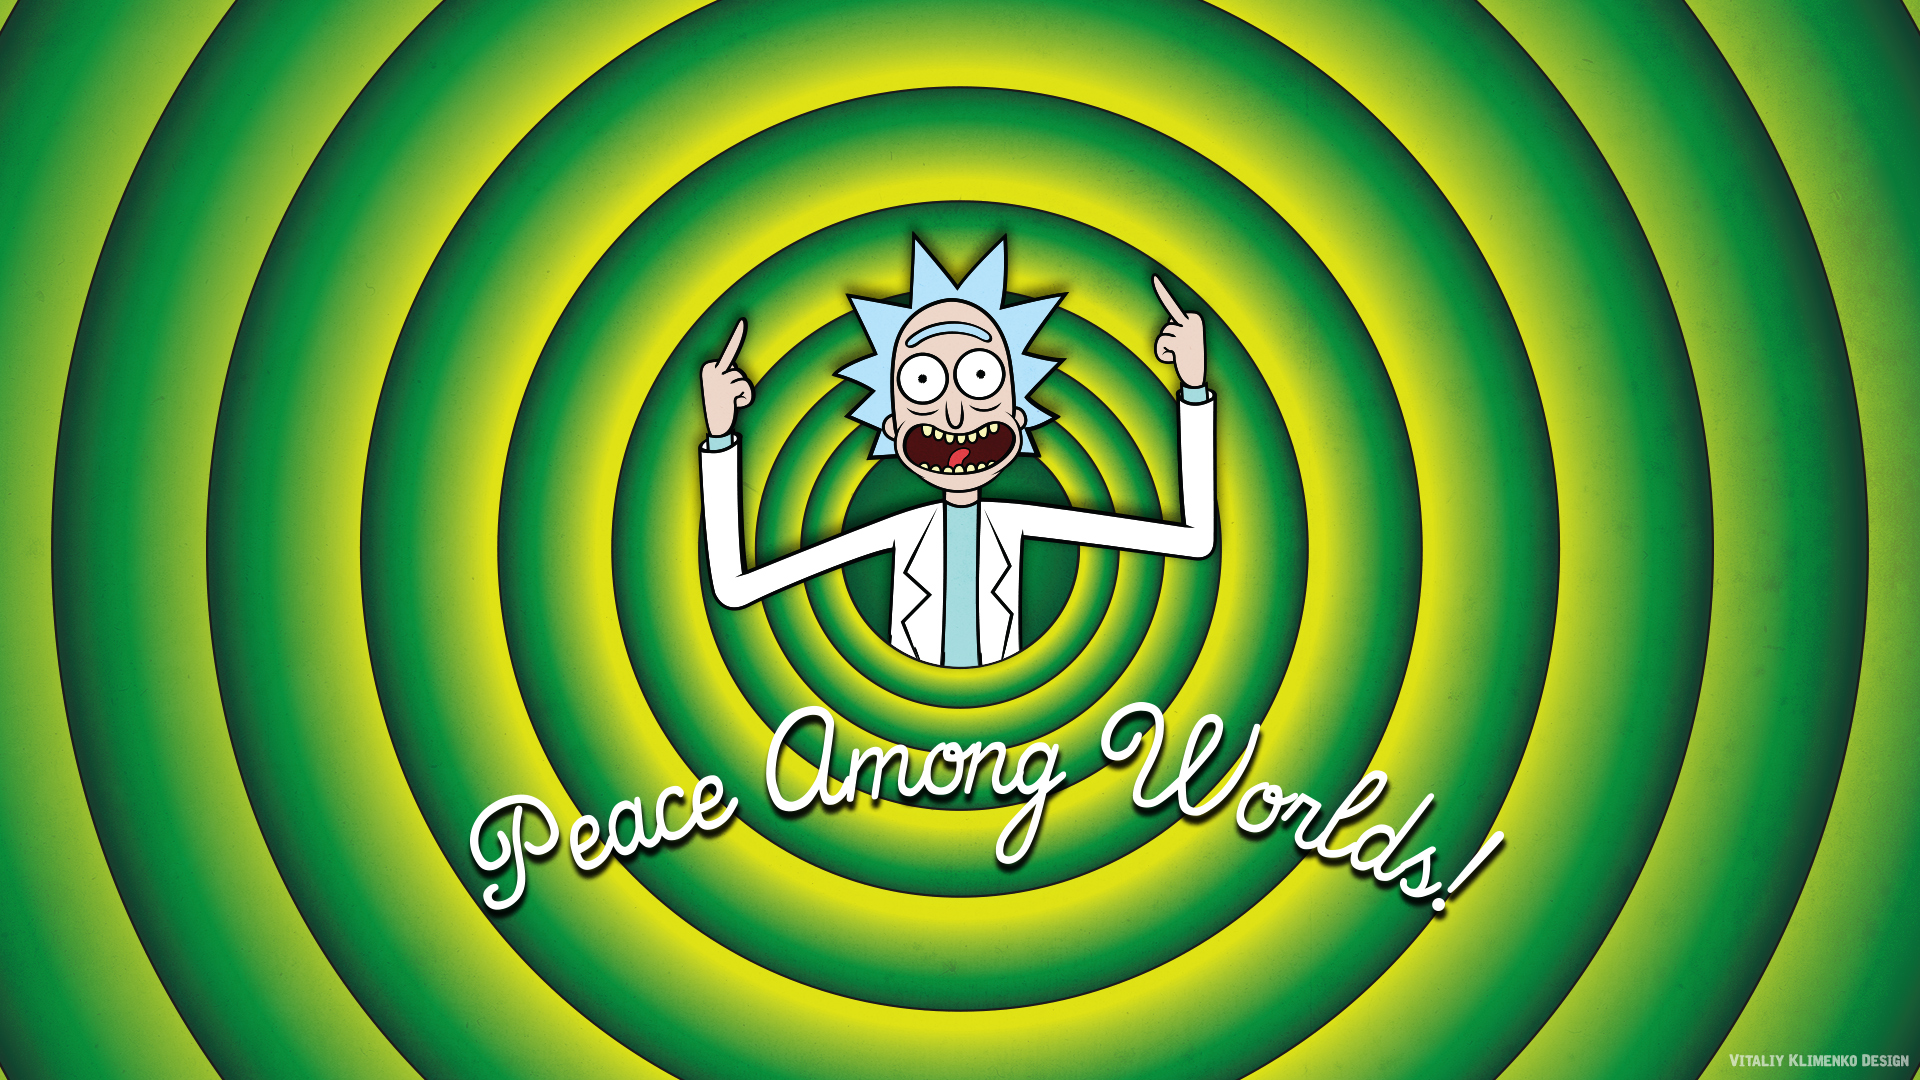 Wallpapers : Rick and Morty, green, middle finger 1920x1080.